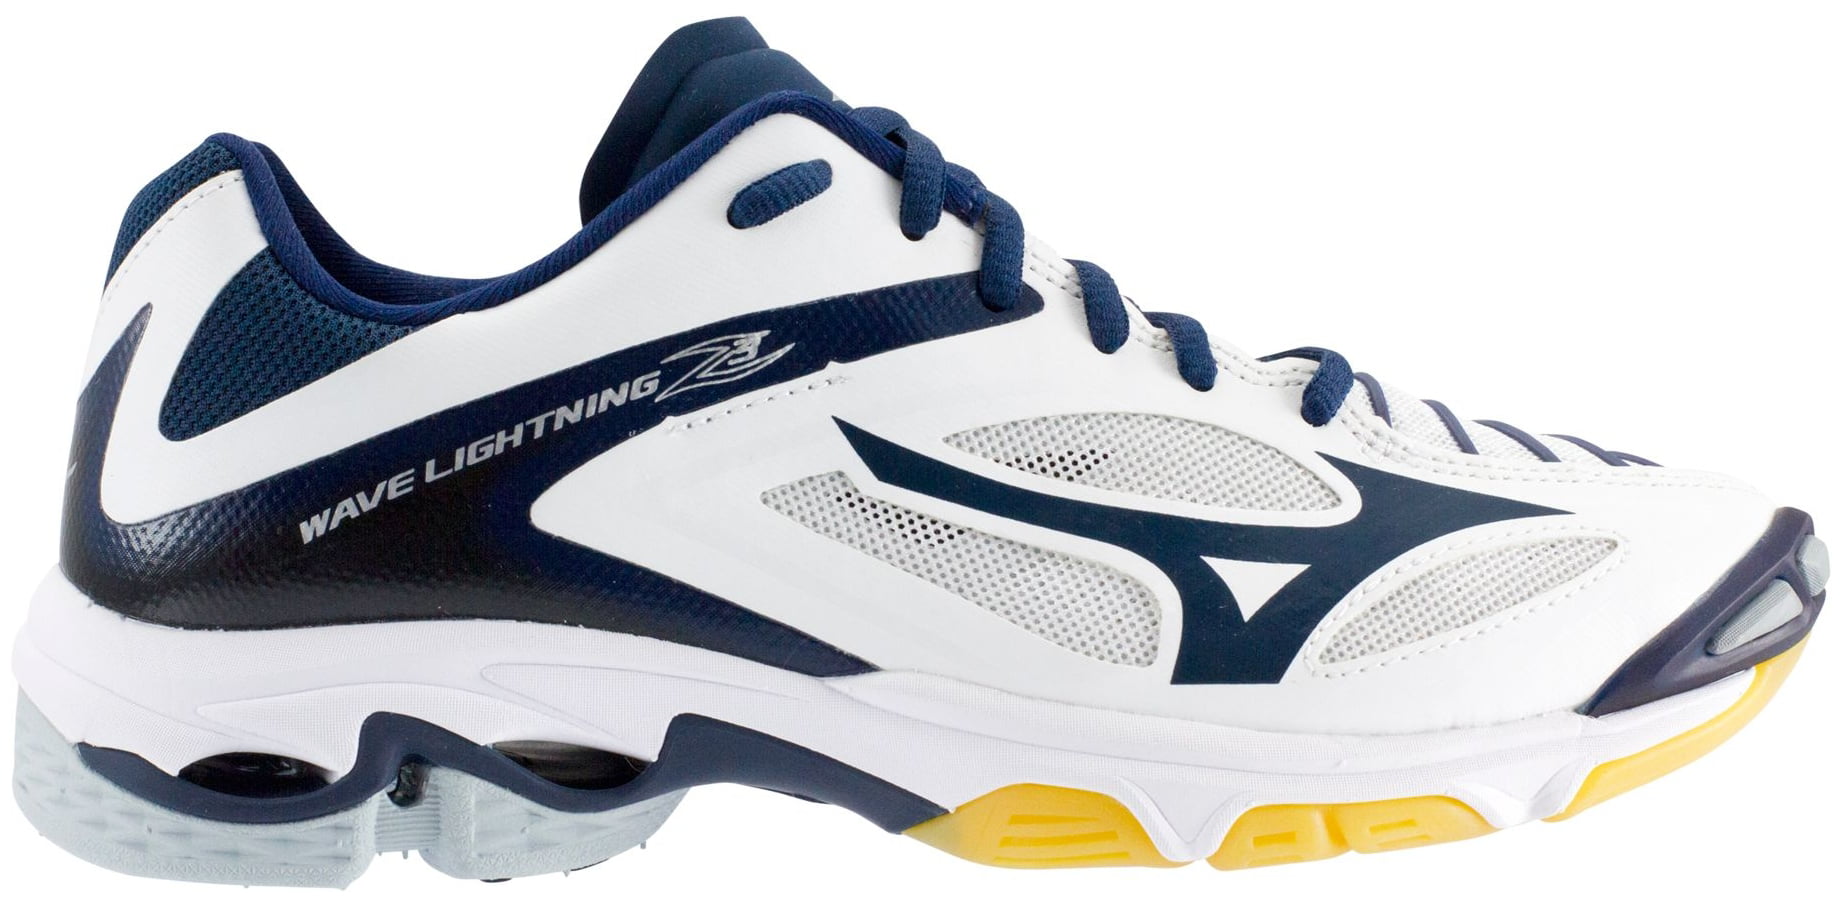 Mizuno Womens Wave Lighting Z3 Volleyball Shoes